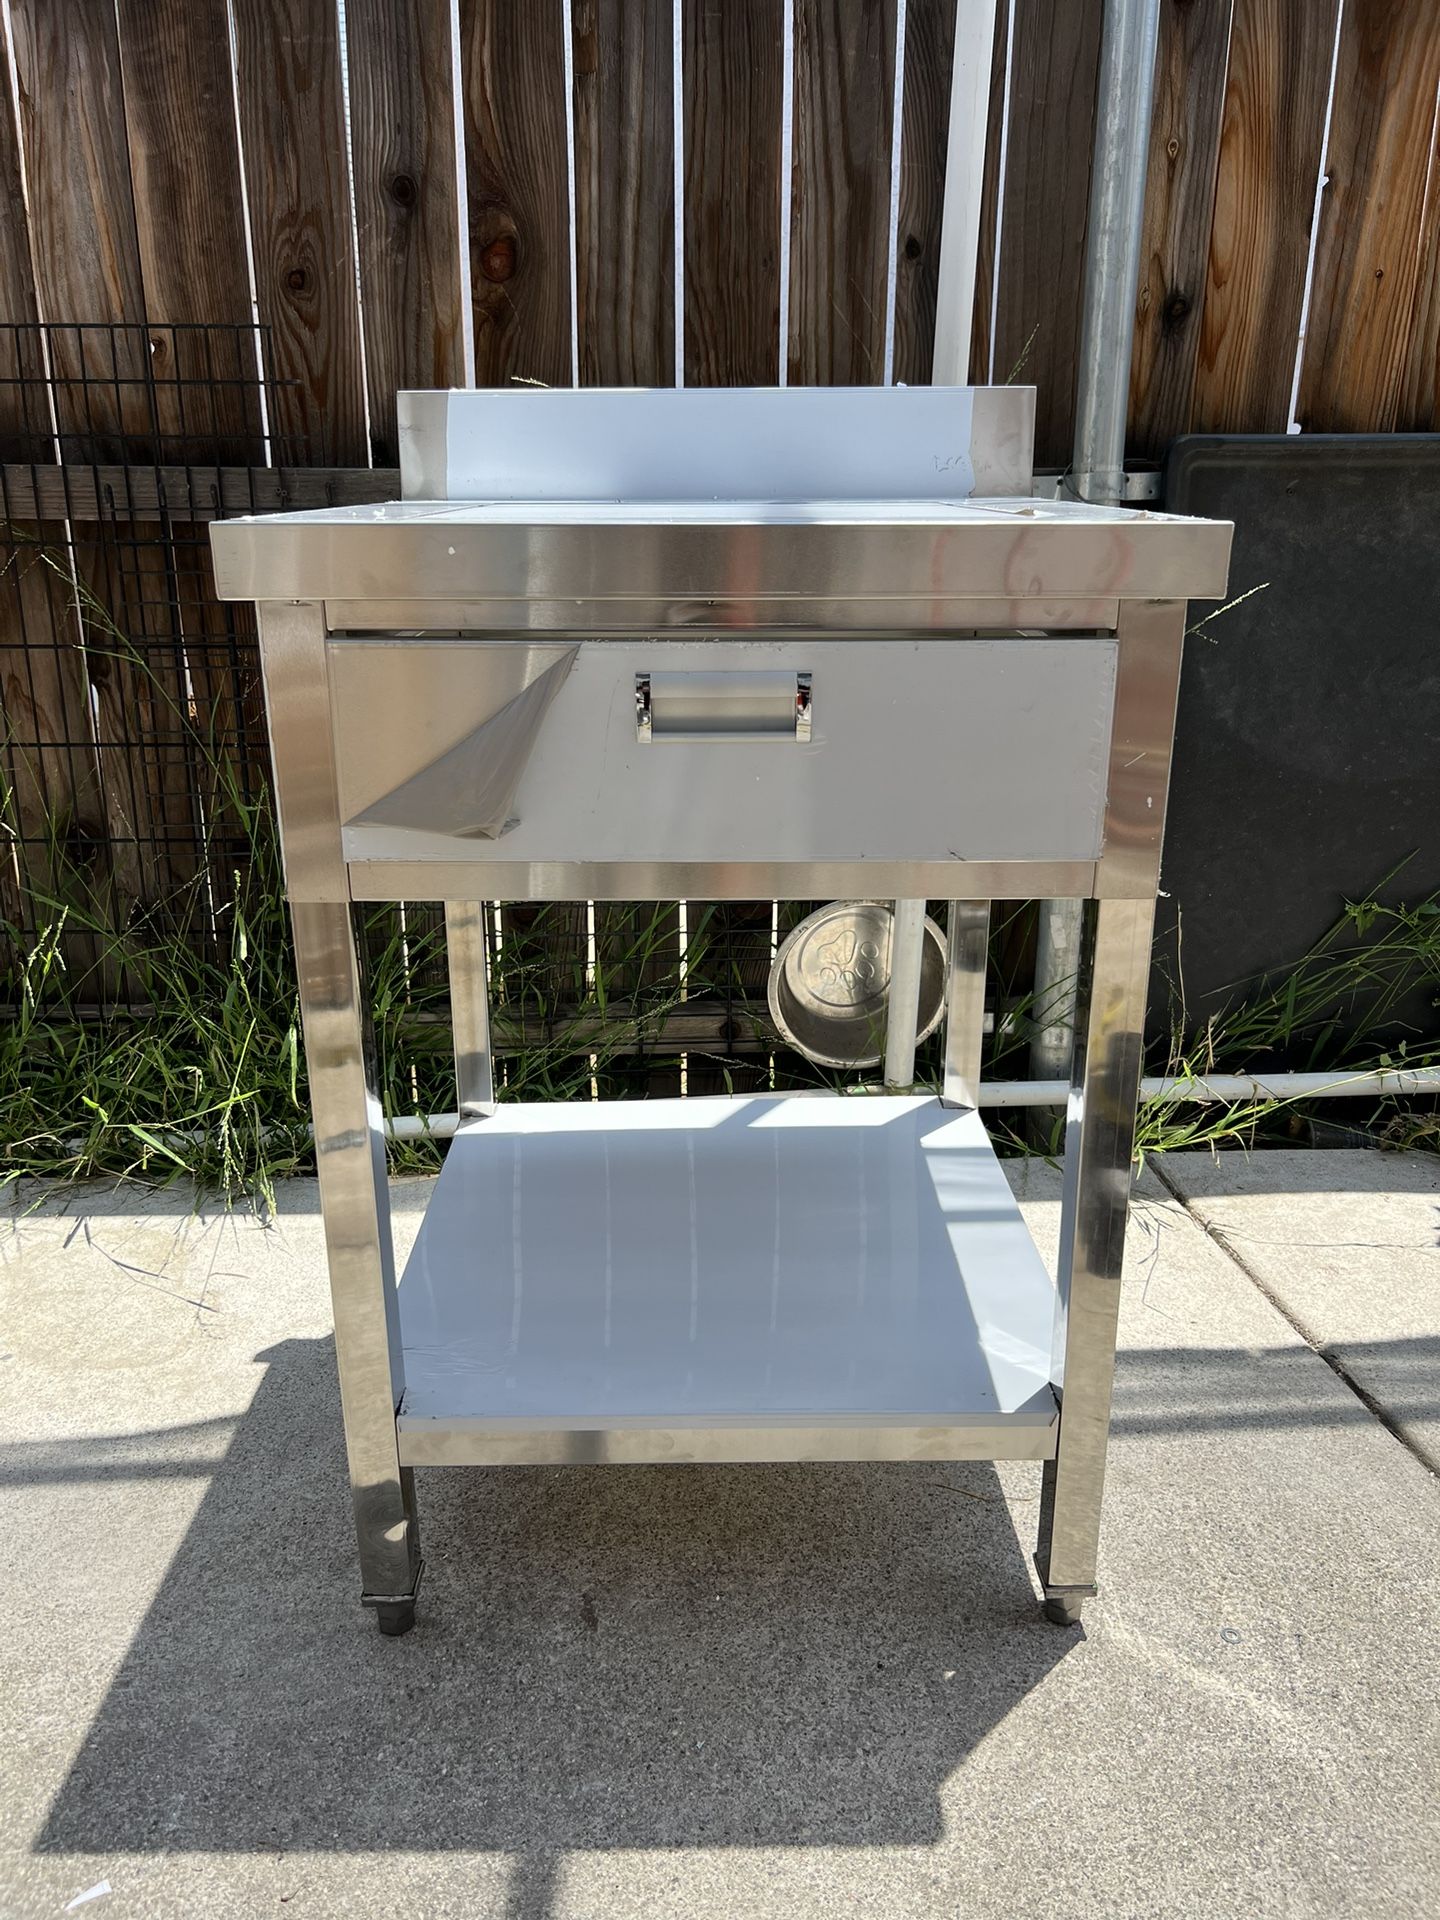 Stainless Steel Prep Table 37”x24”x24”